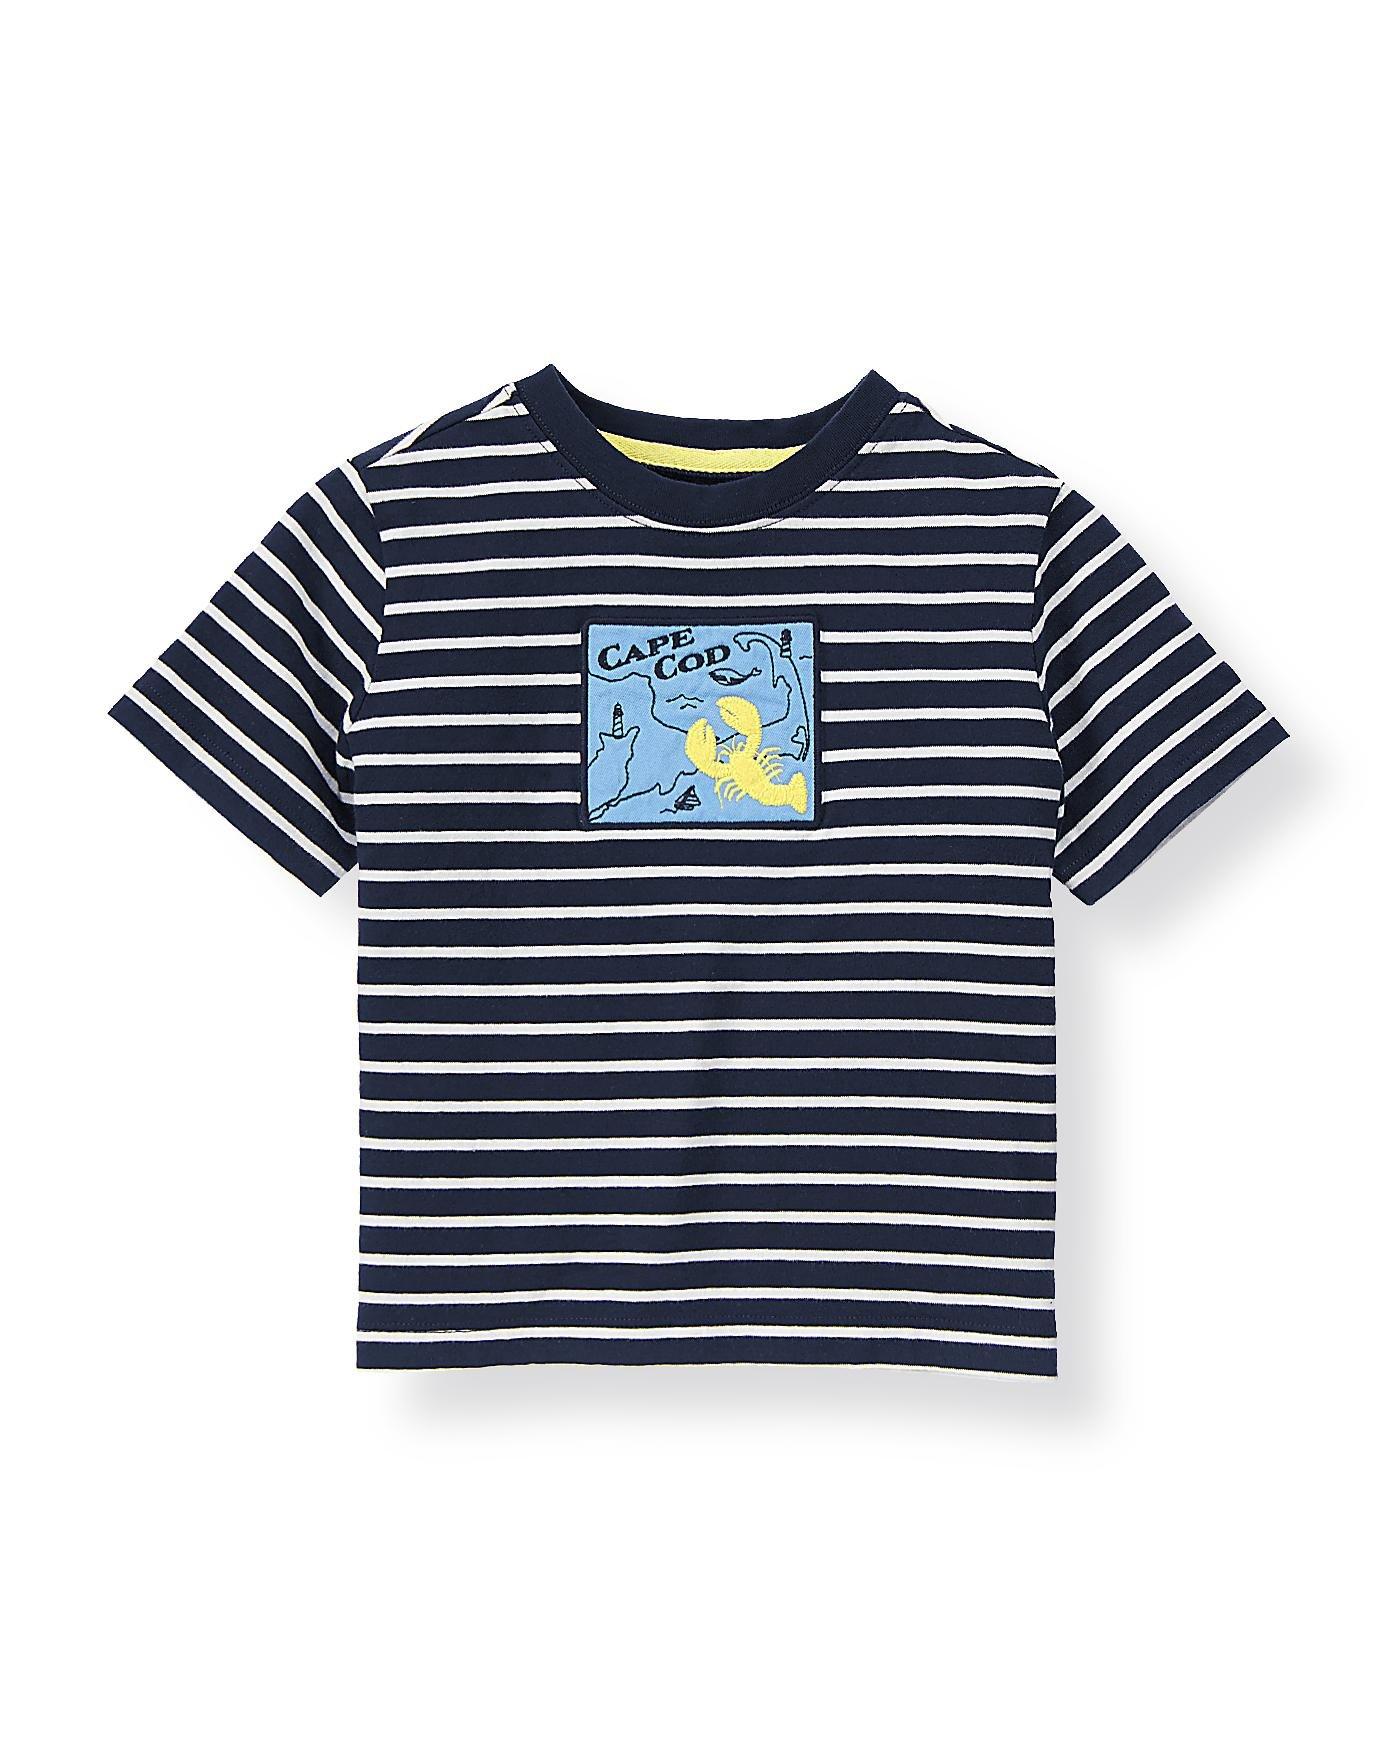 Cape Cod Striped Tee image number 0